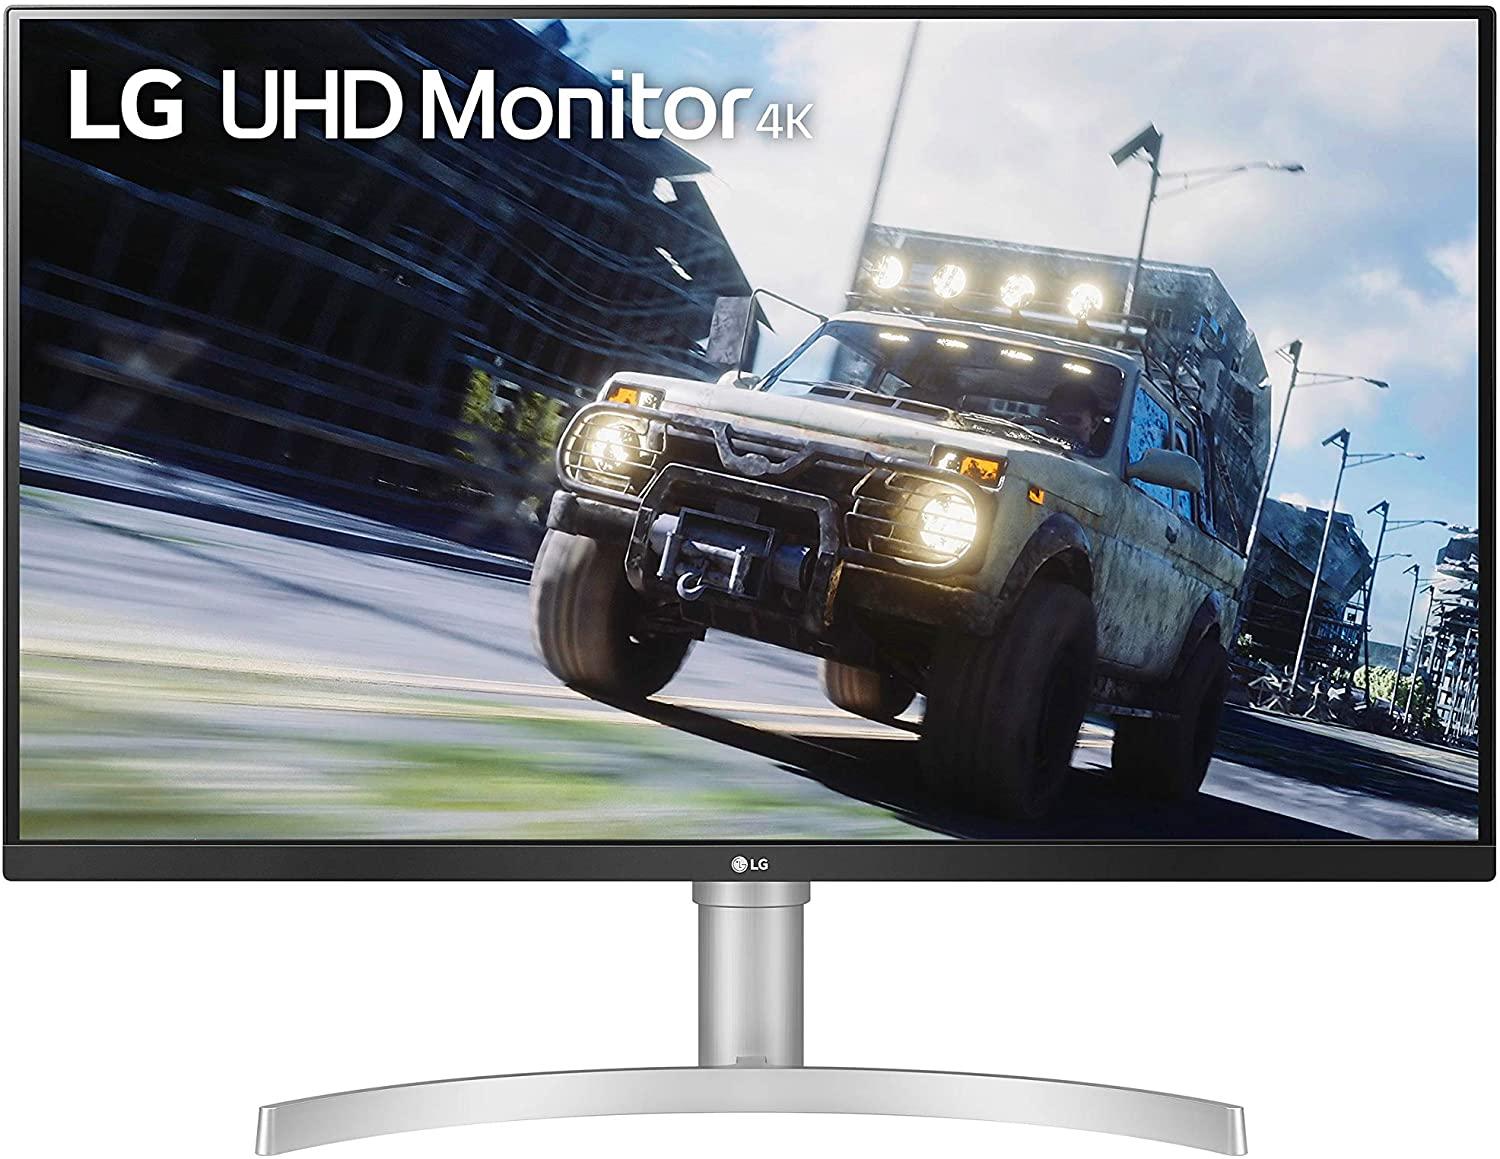 31.5in LG 32UN550-W 4K UHD HDR Monitor for $296.99 Shipped